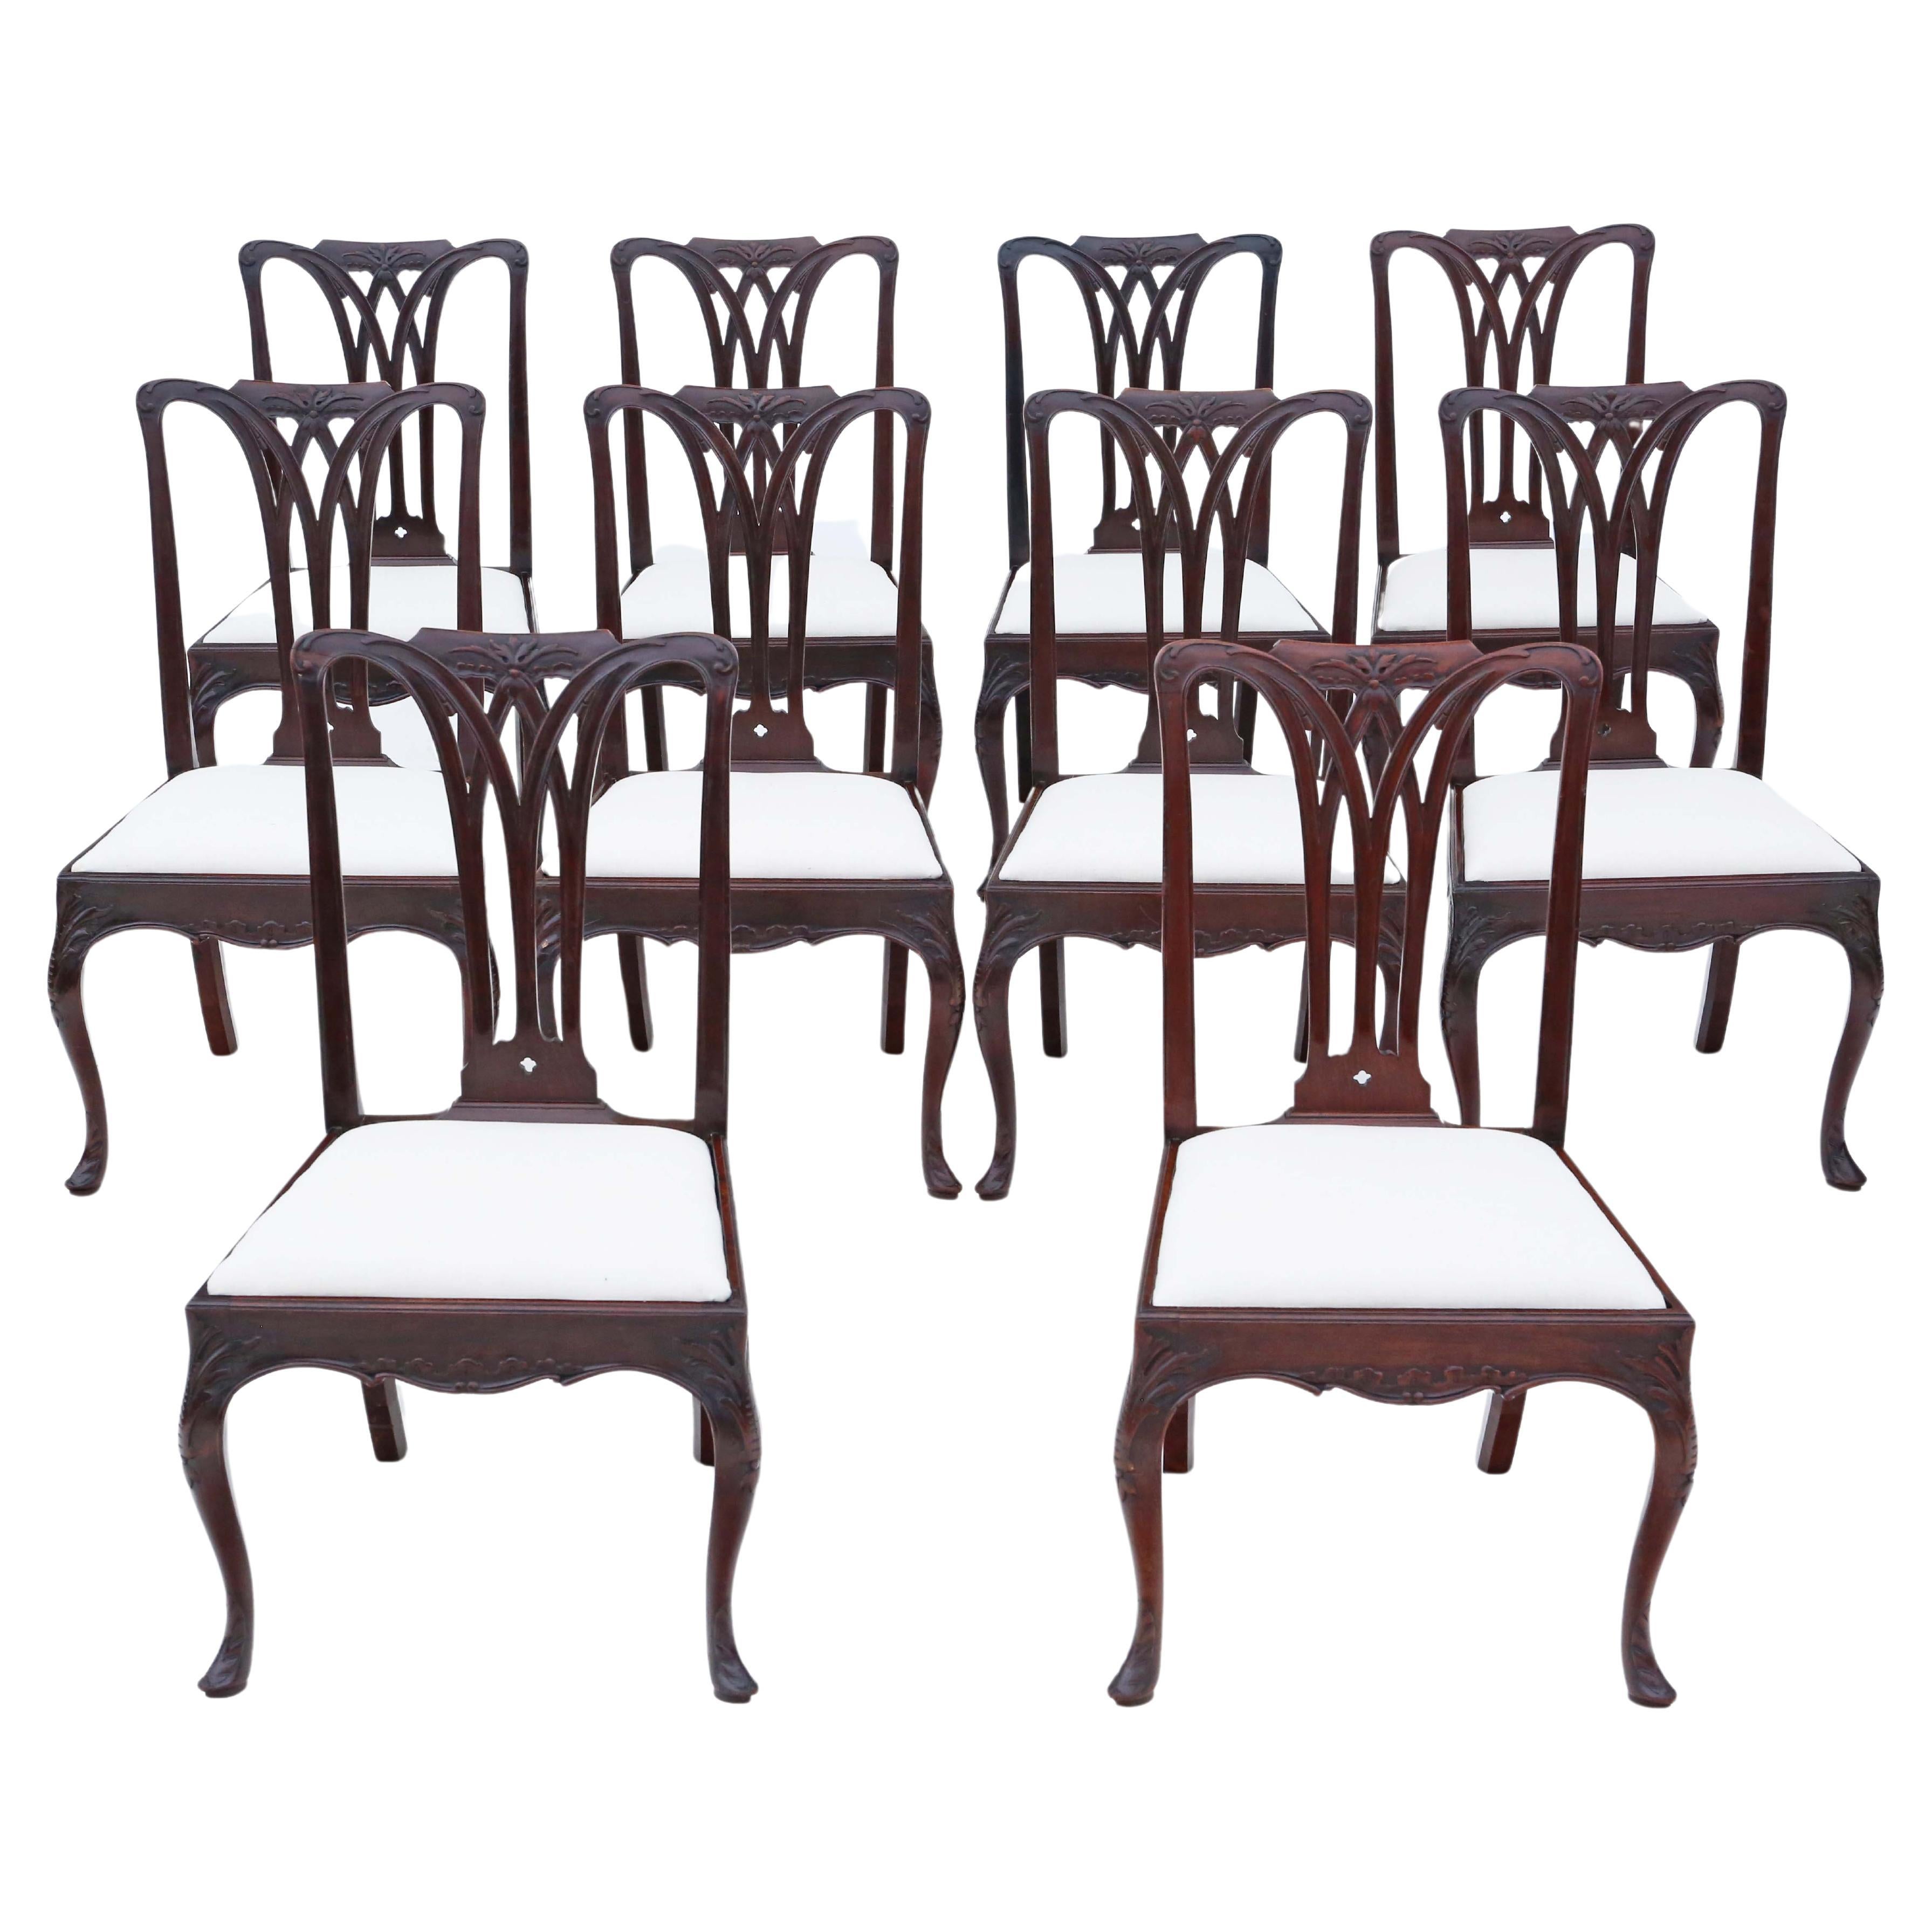 Antique 18th Century Georgian Mahogany Dining Chairs: Set of 10, High Quality